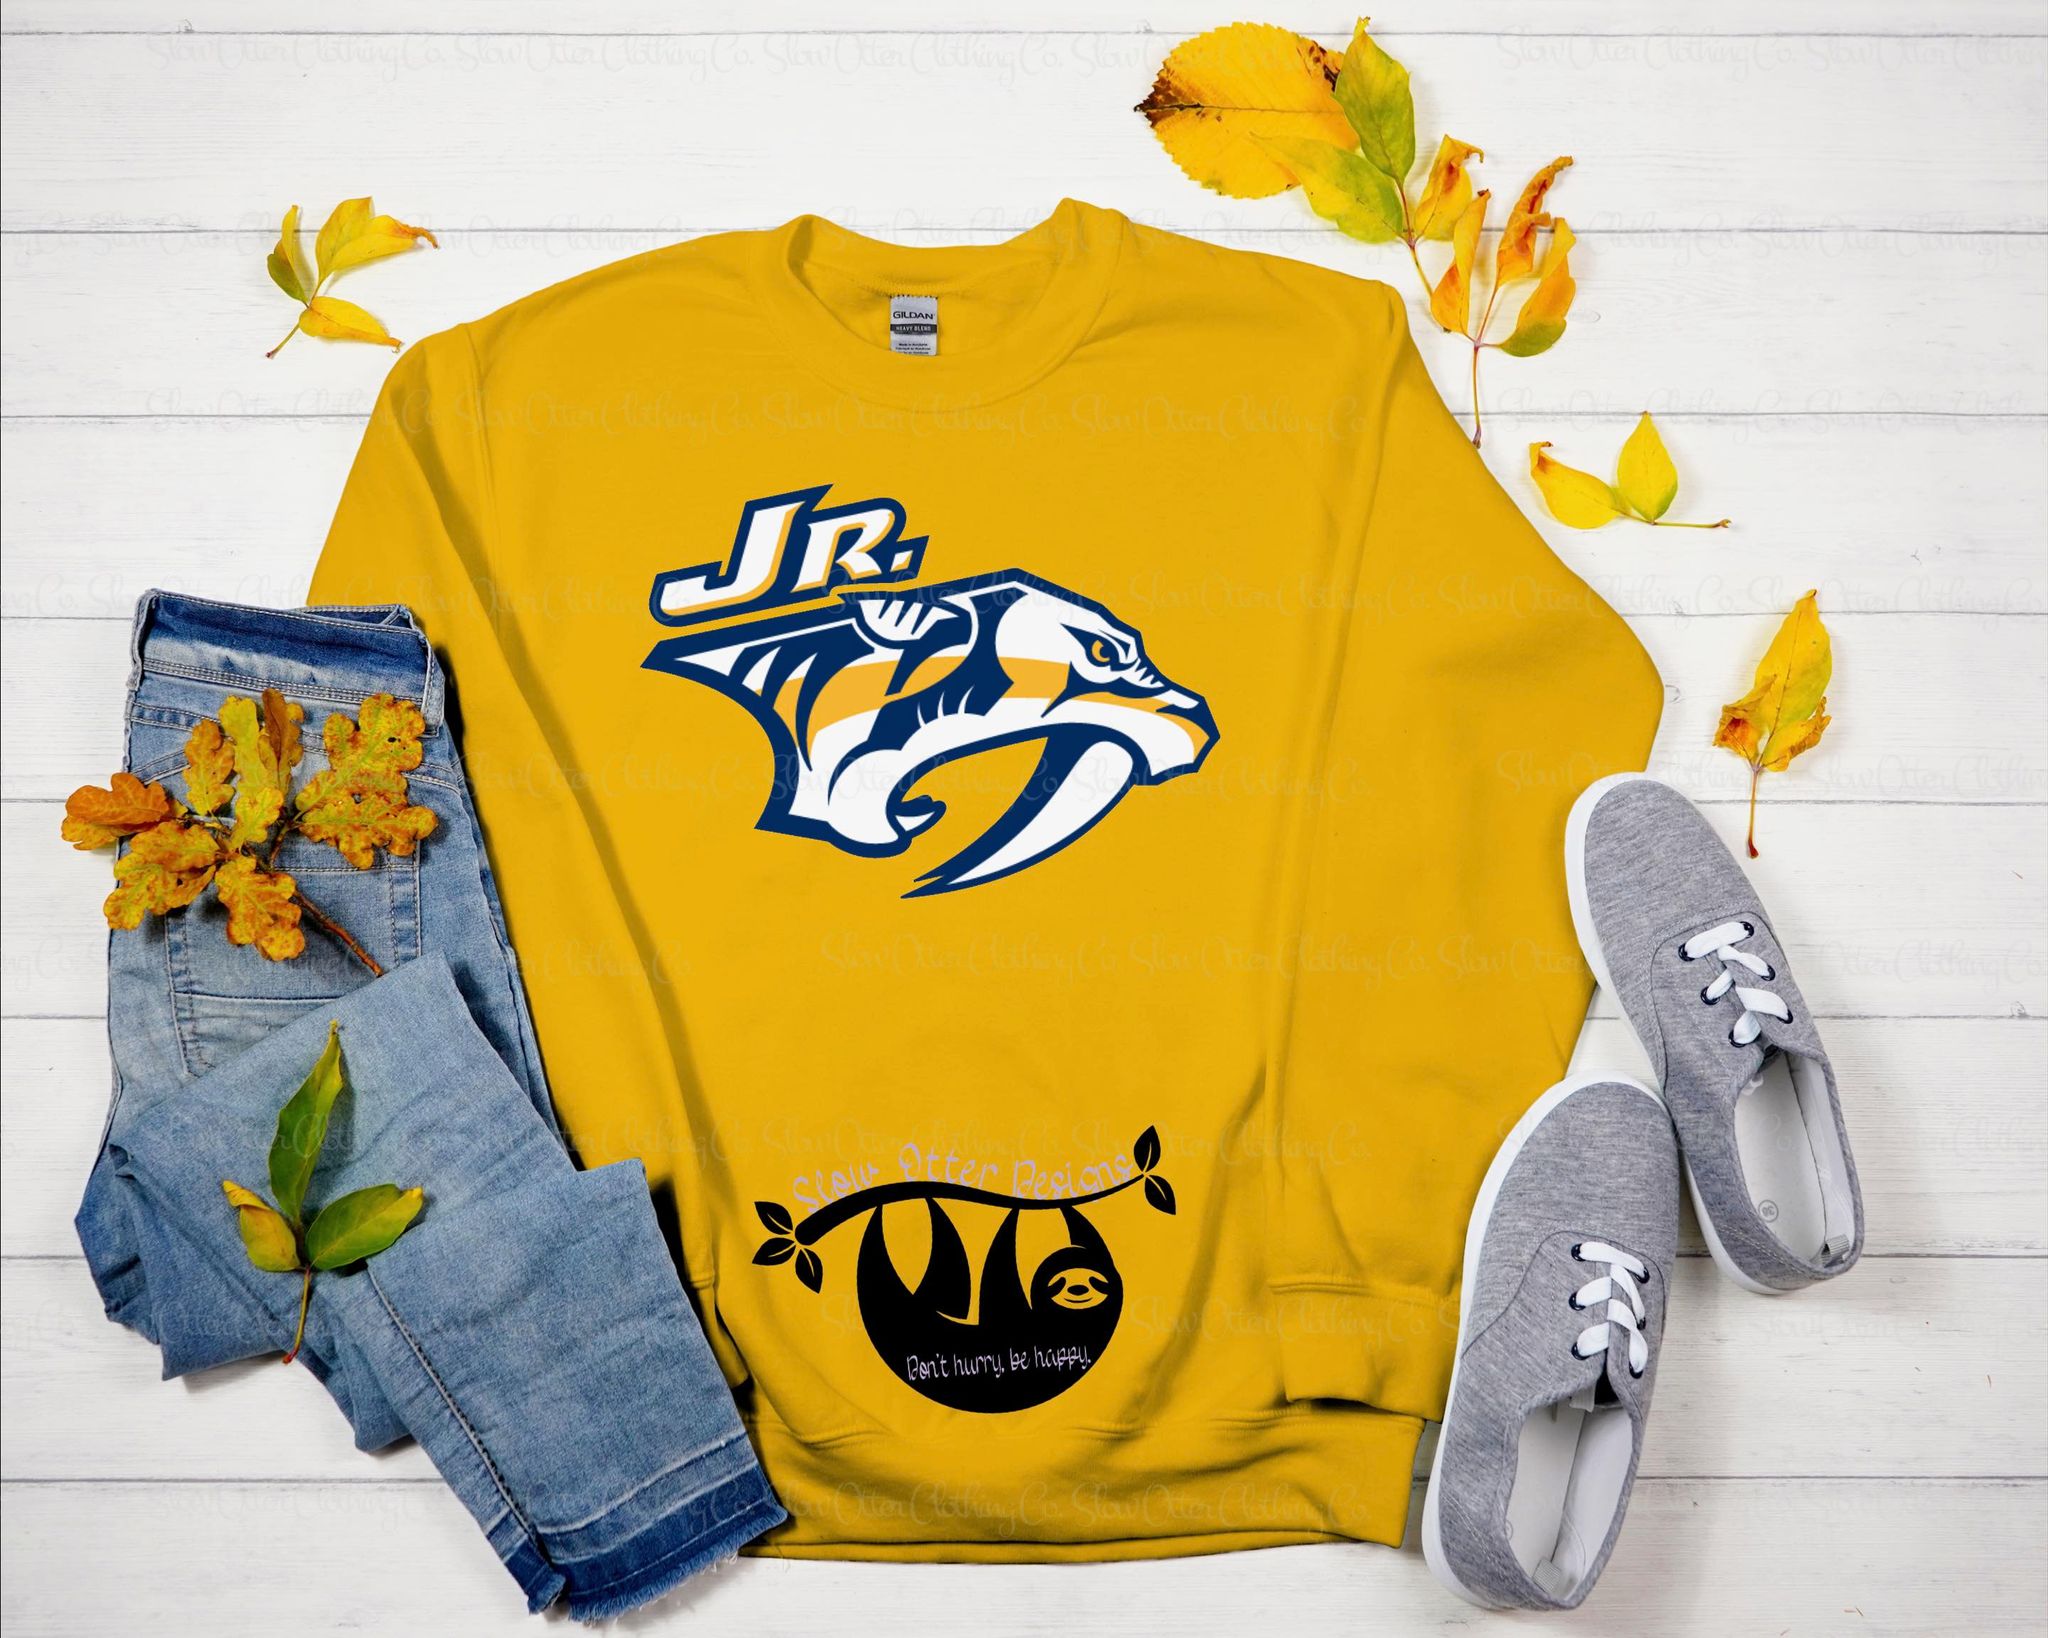 Jr. Preds Unisex Cotton Tee with Customizable Player's Number (on back –  Slow Otter Designs